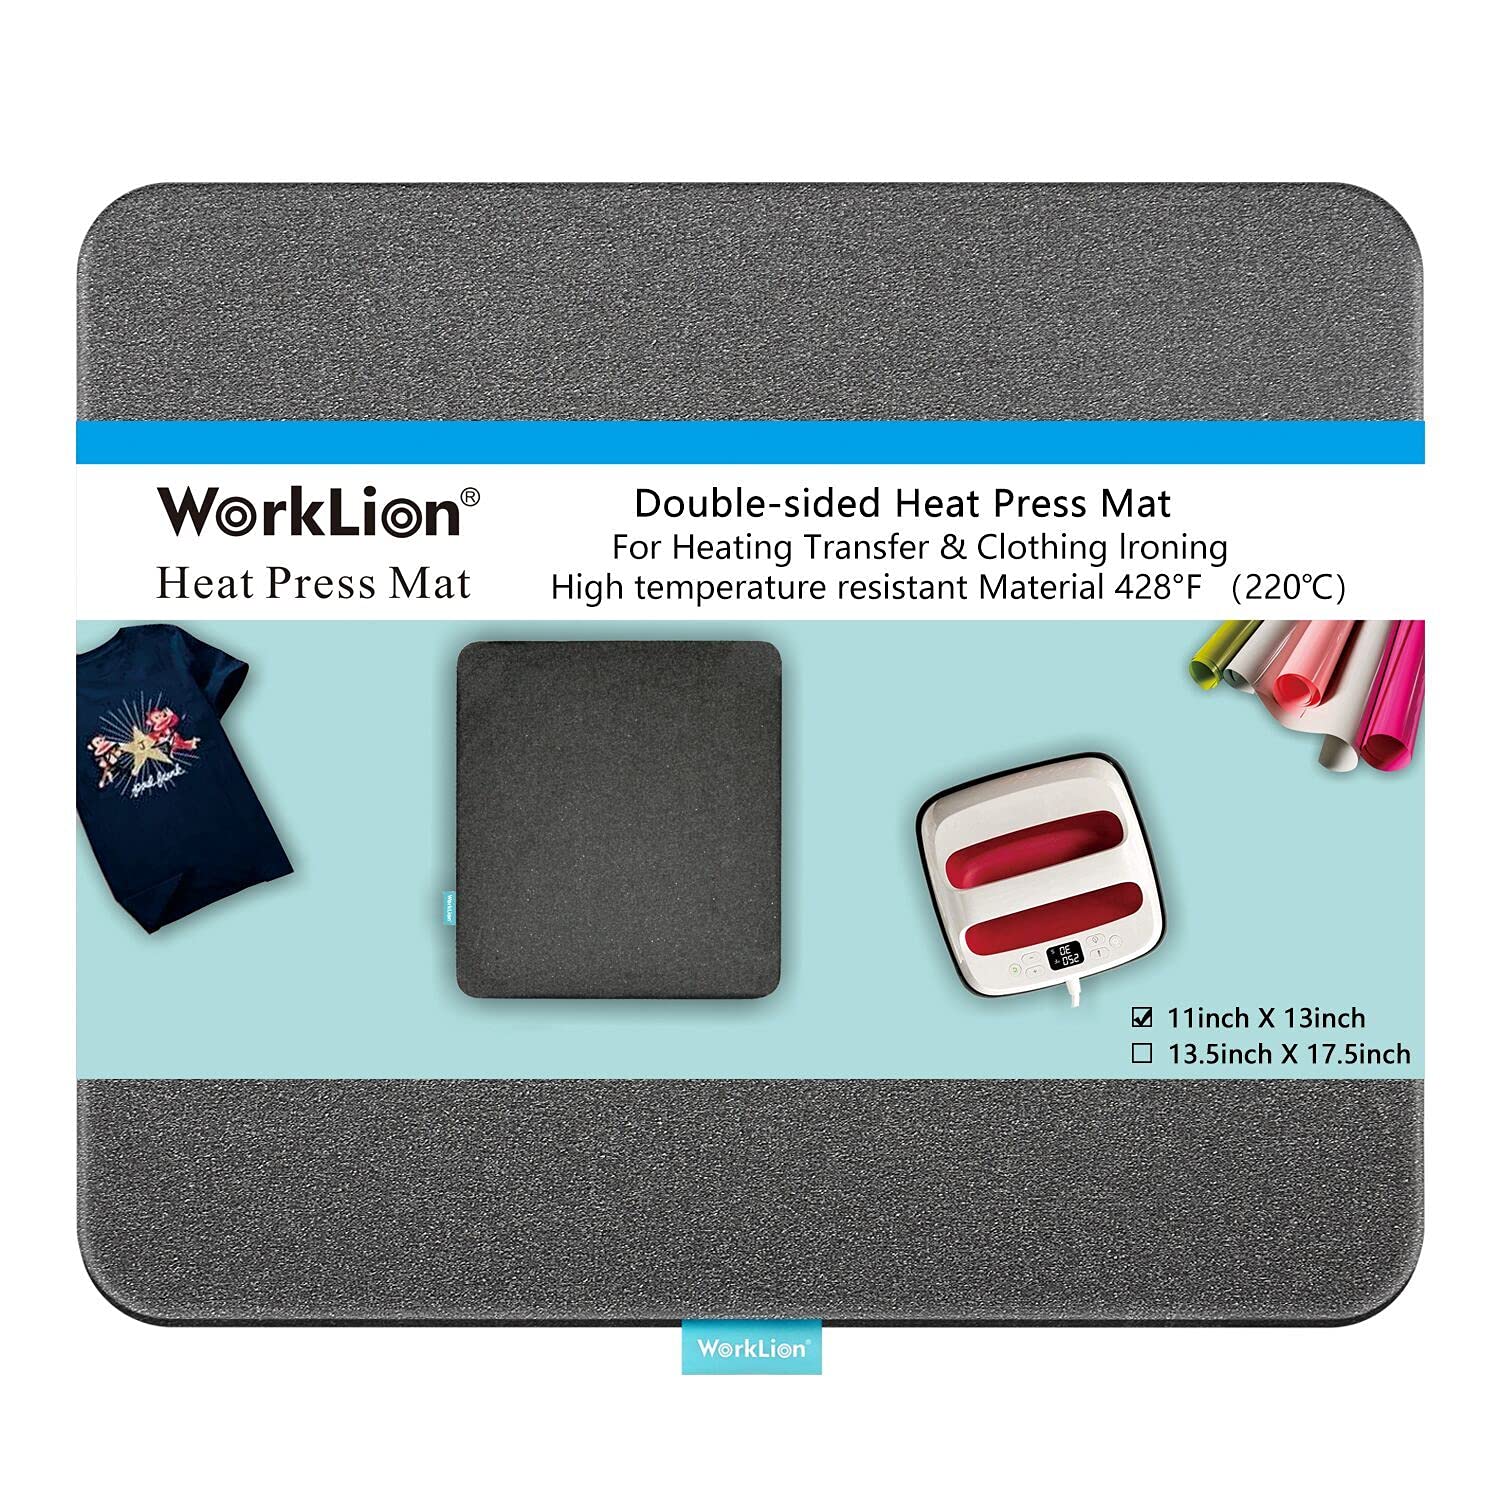 WORKLION Heat Press Mat 11x13: Double-Sided Fireproof Materials  Protective Resistant Mat for Cricut Easypress/Easypress 2 & HTV Craft Vinyl  Ironing Insulation Transfer Projects